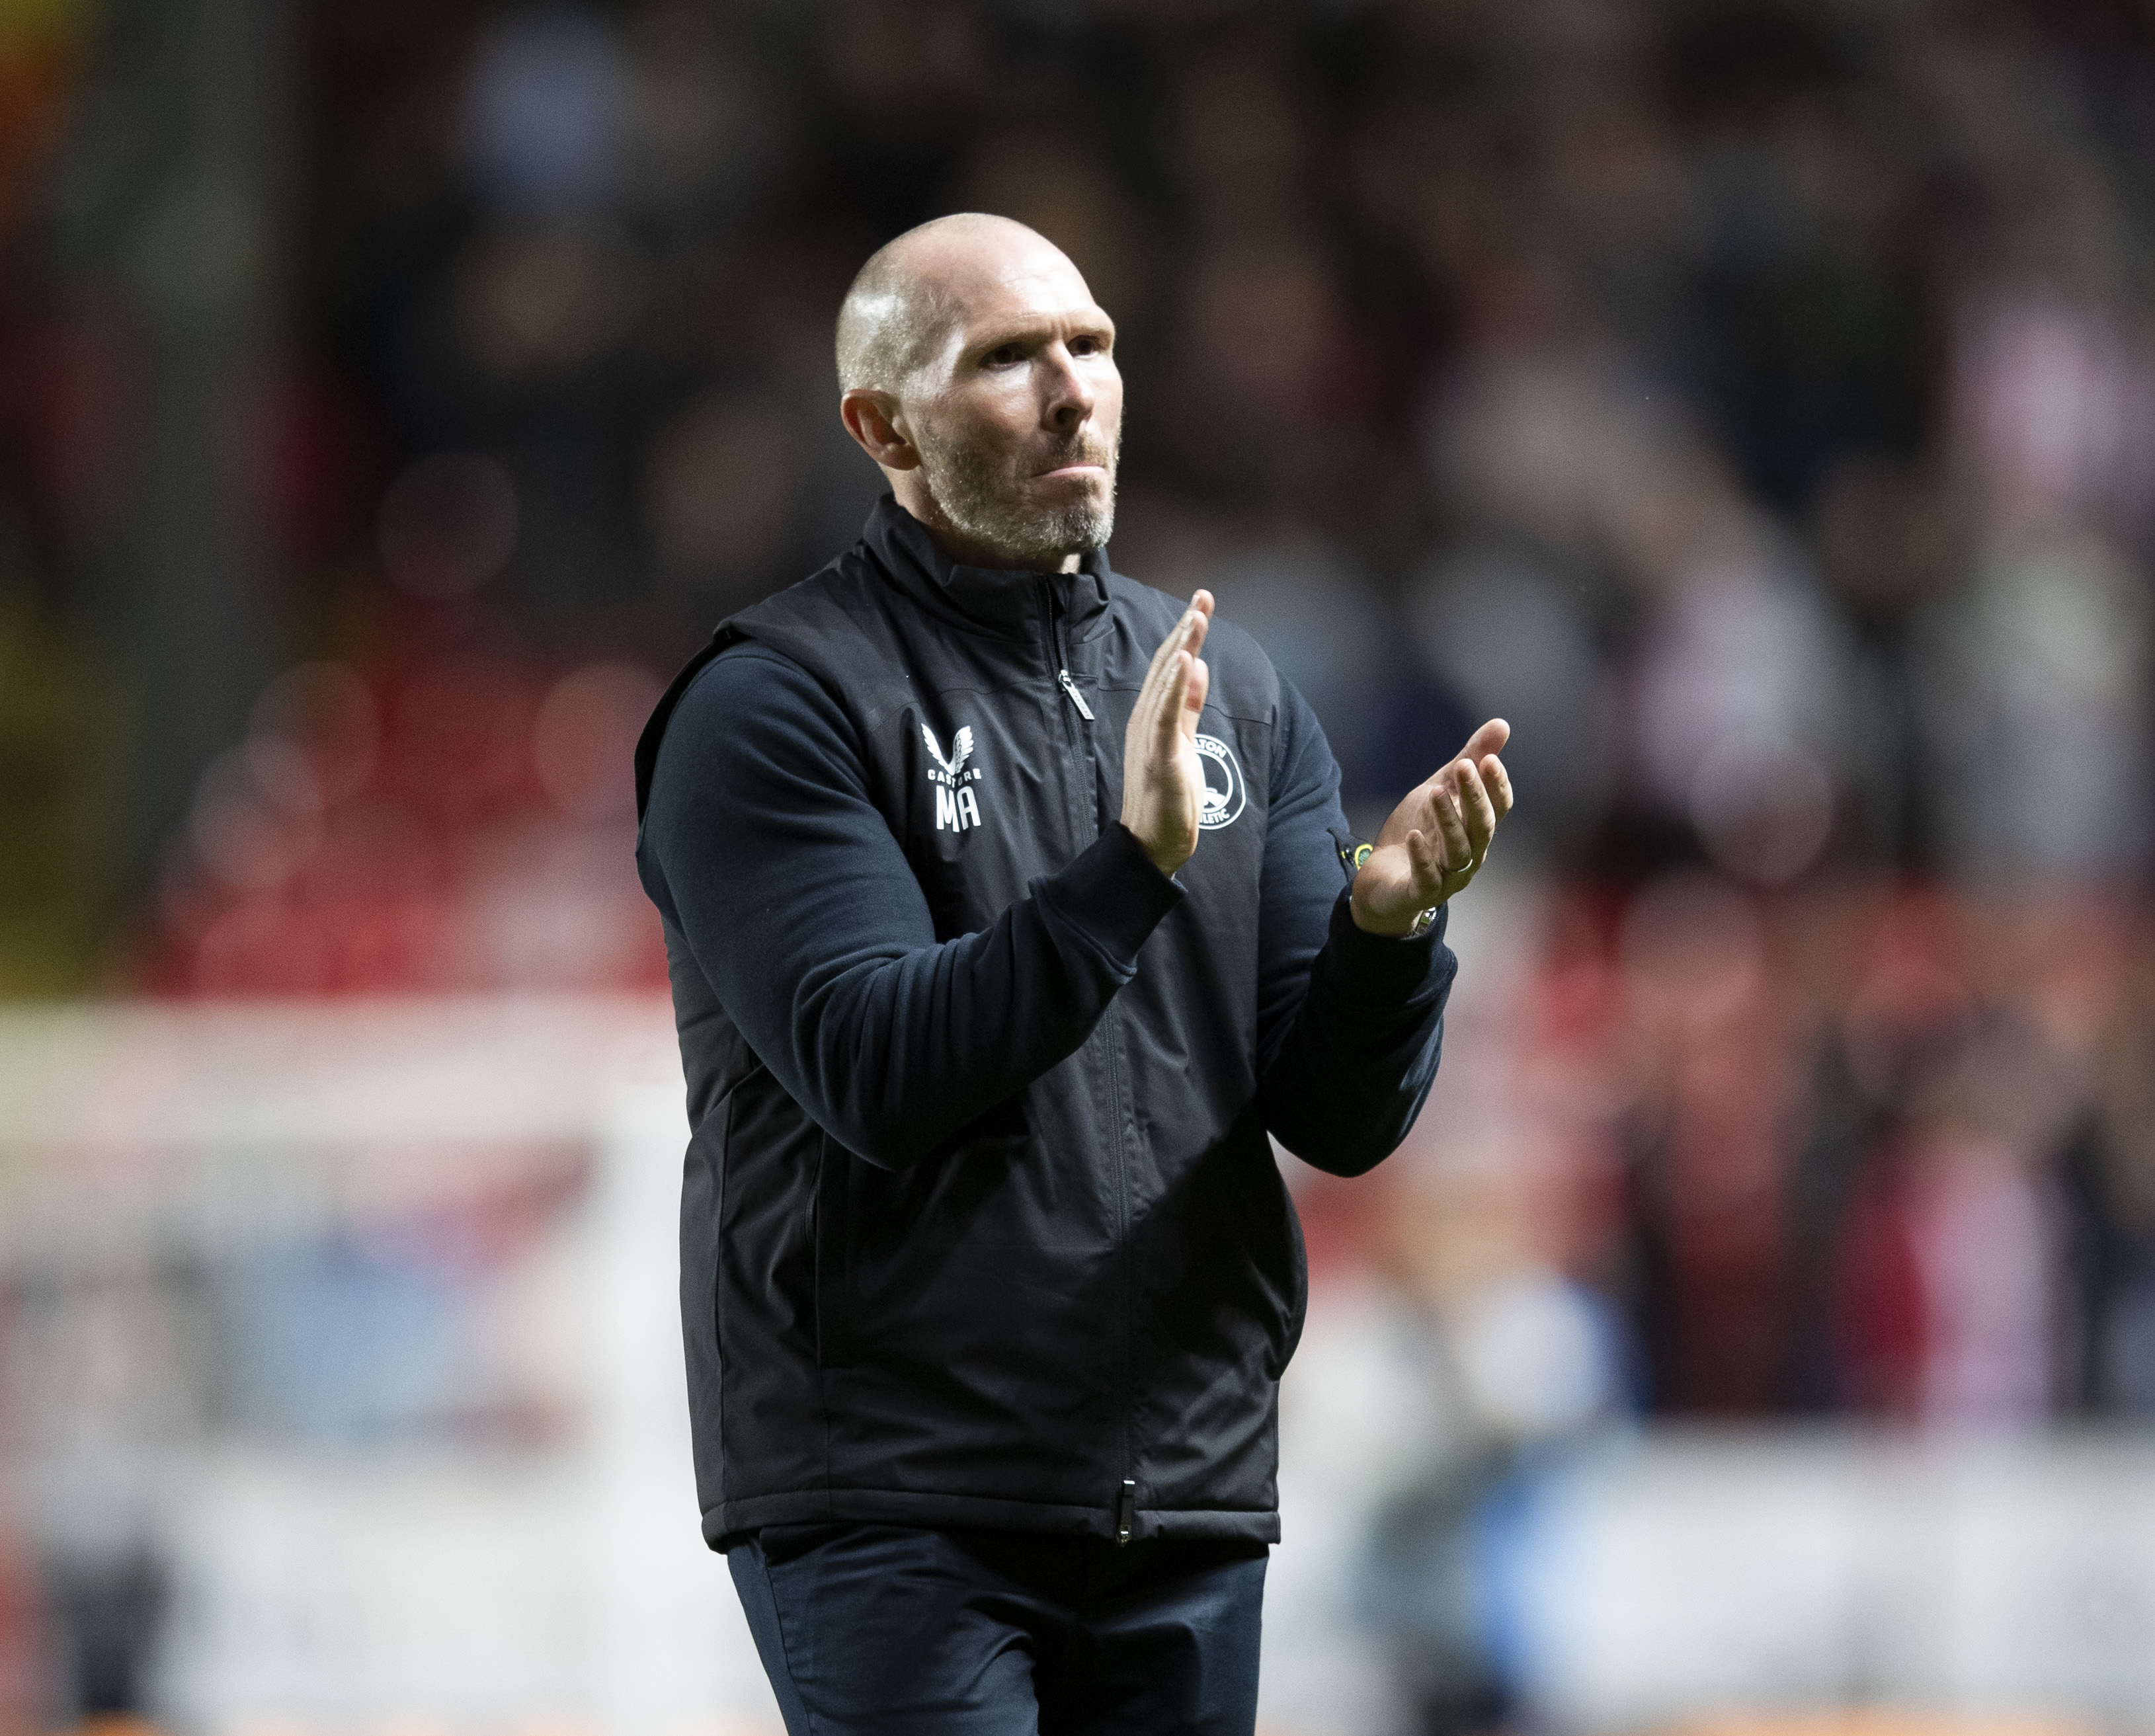 Michael Appleton claps supporters